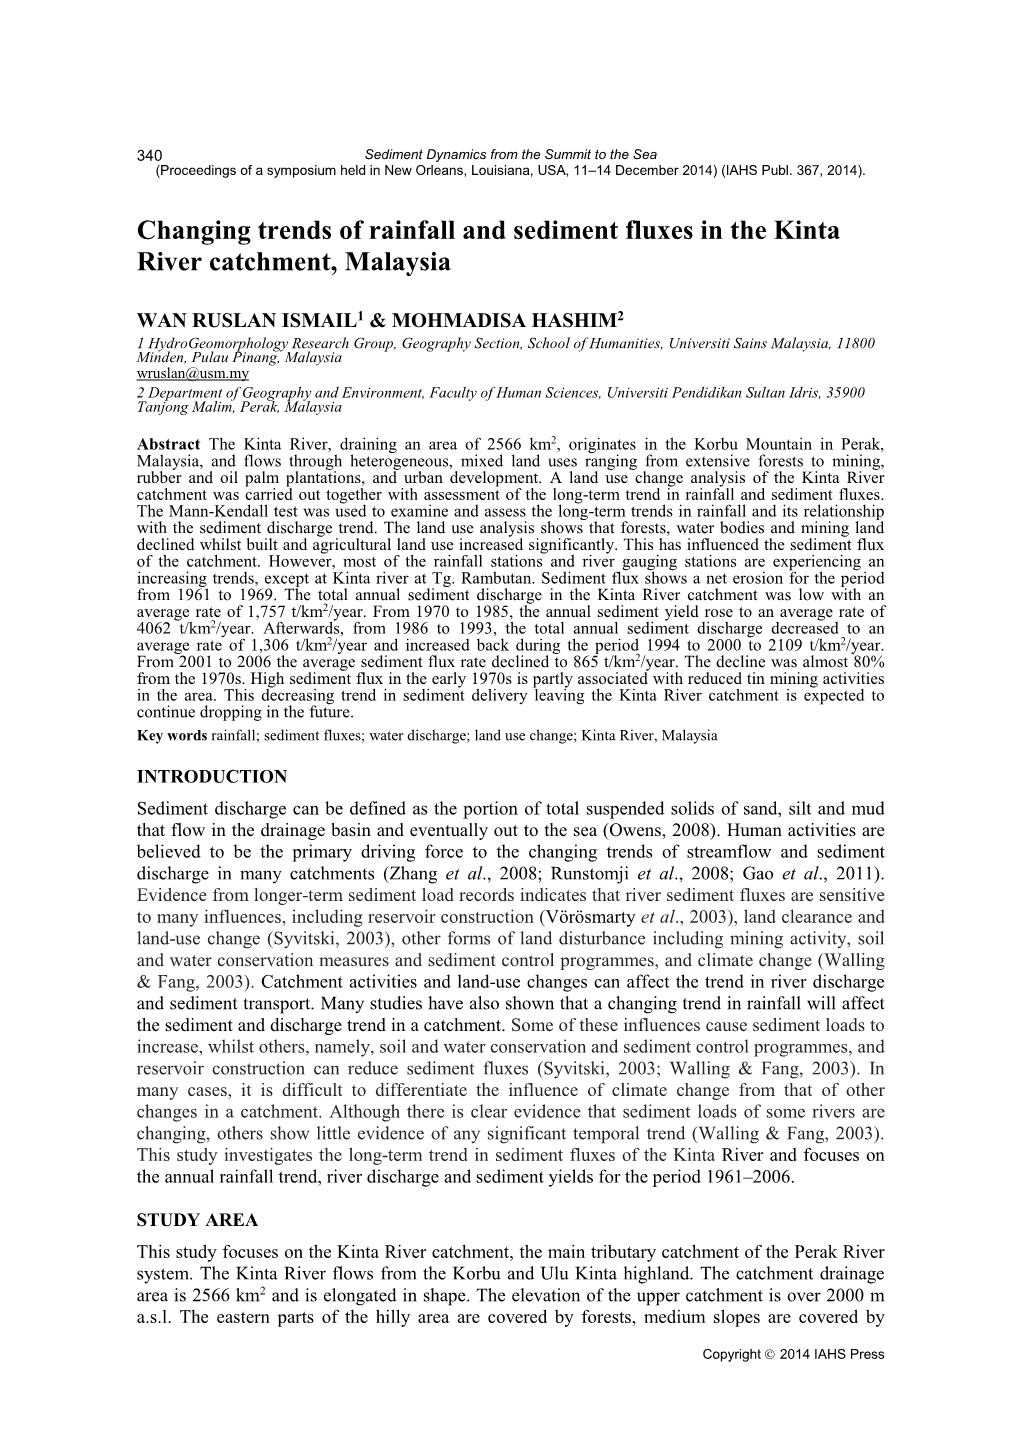 Changing Trends of Rainfall and Sediment Fluxes in the Kinta River Catchment, Malaysia